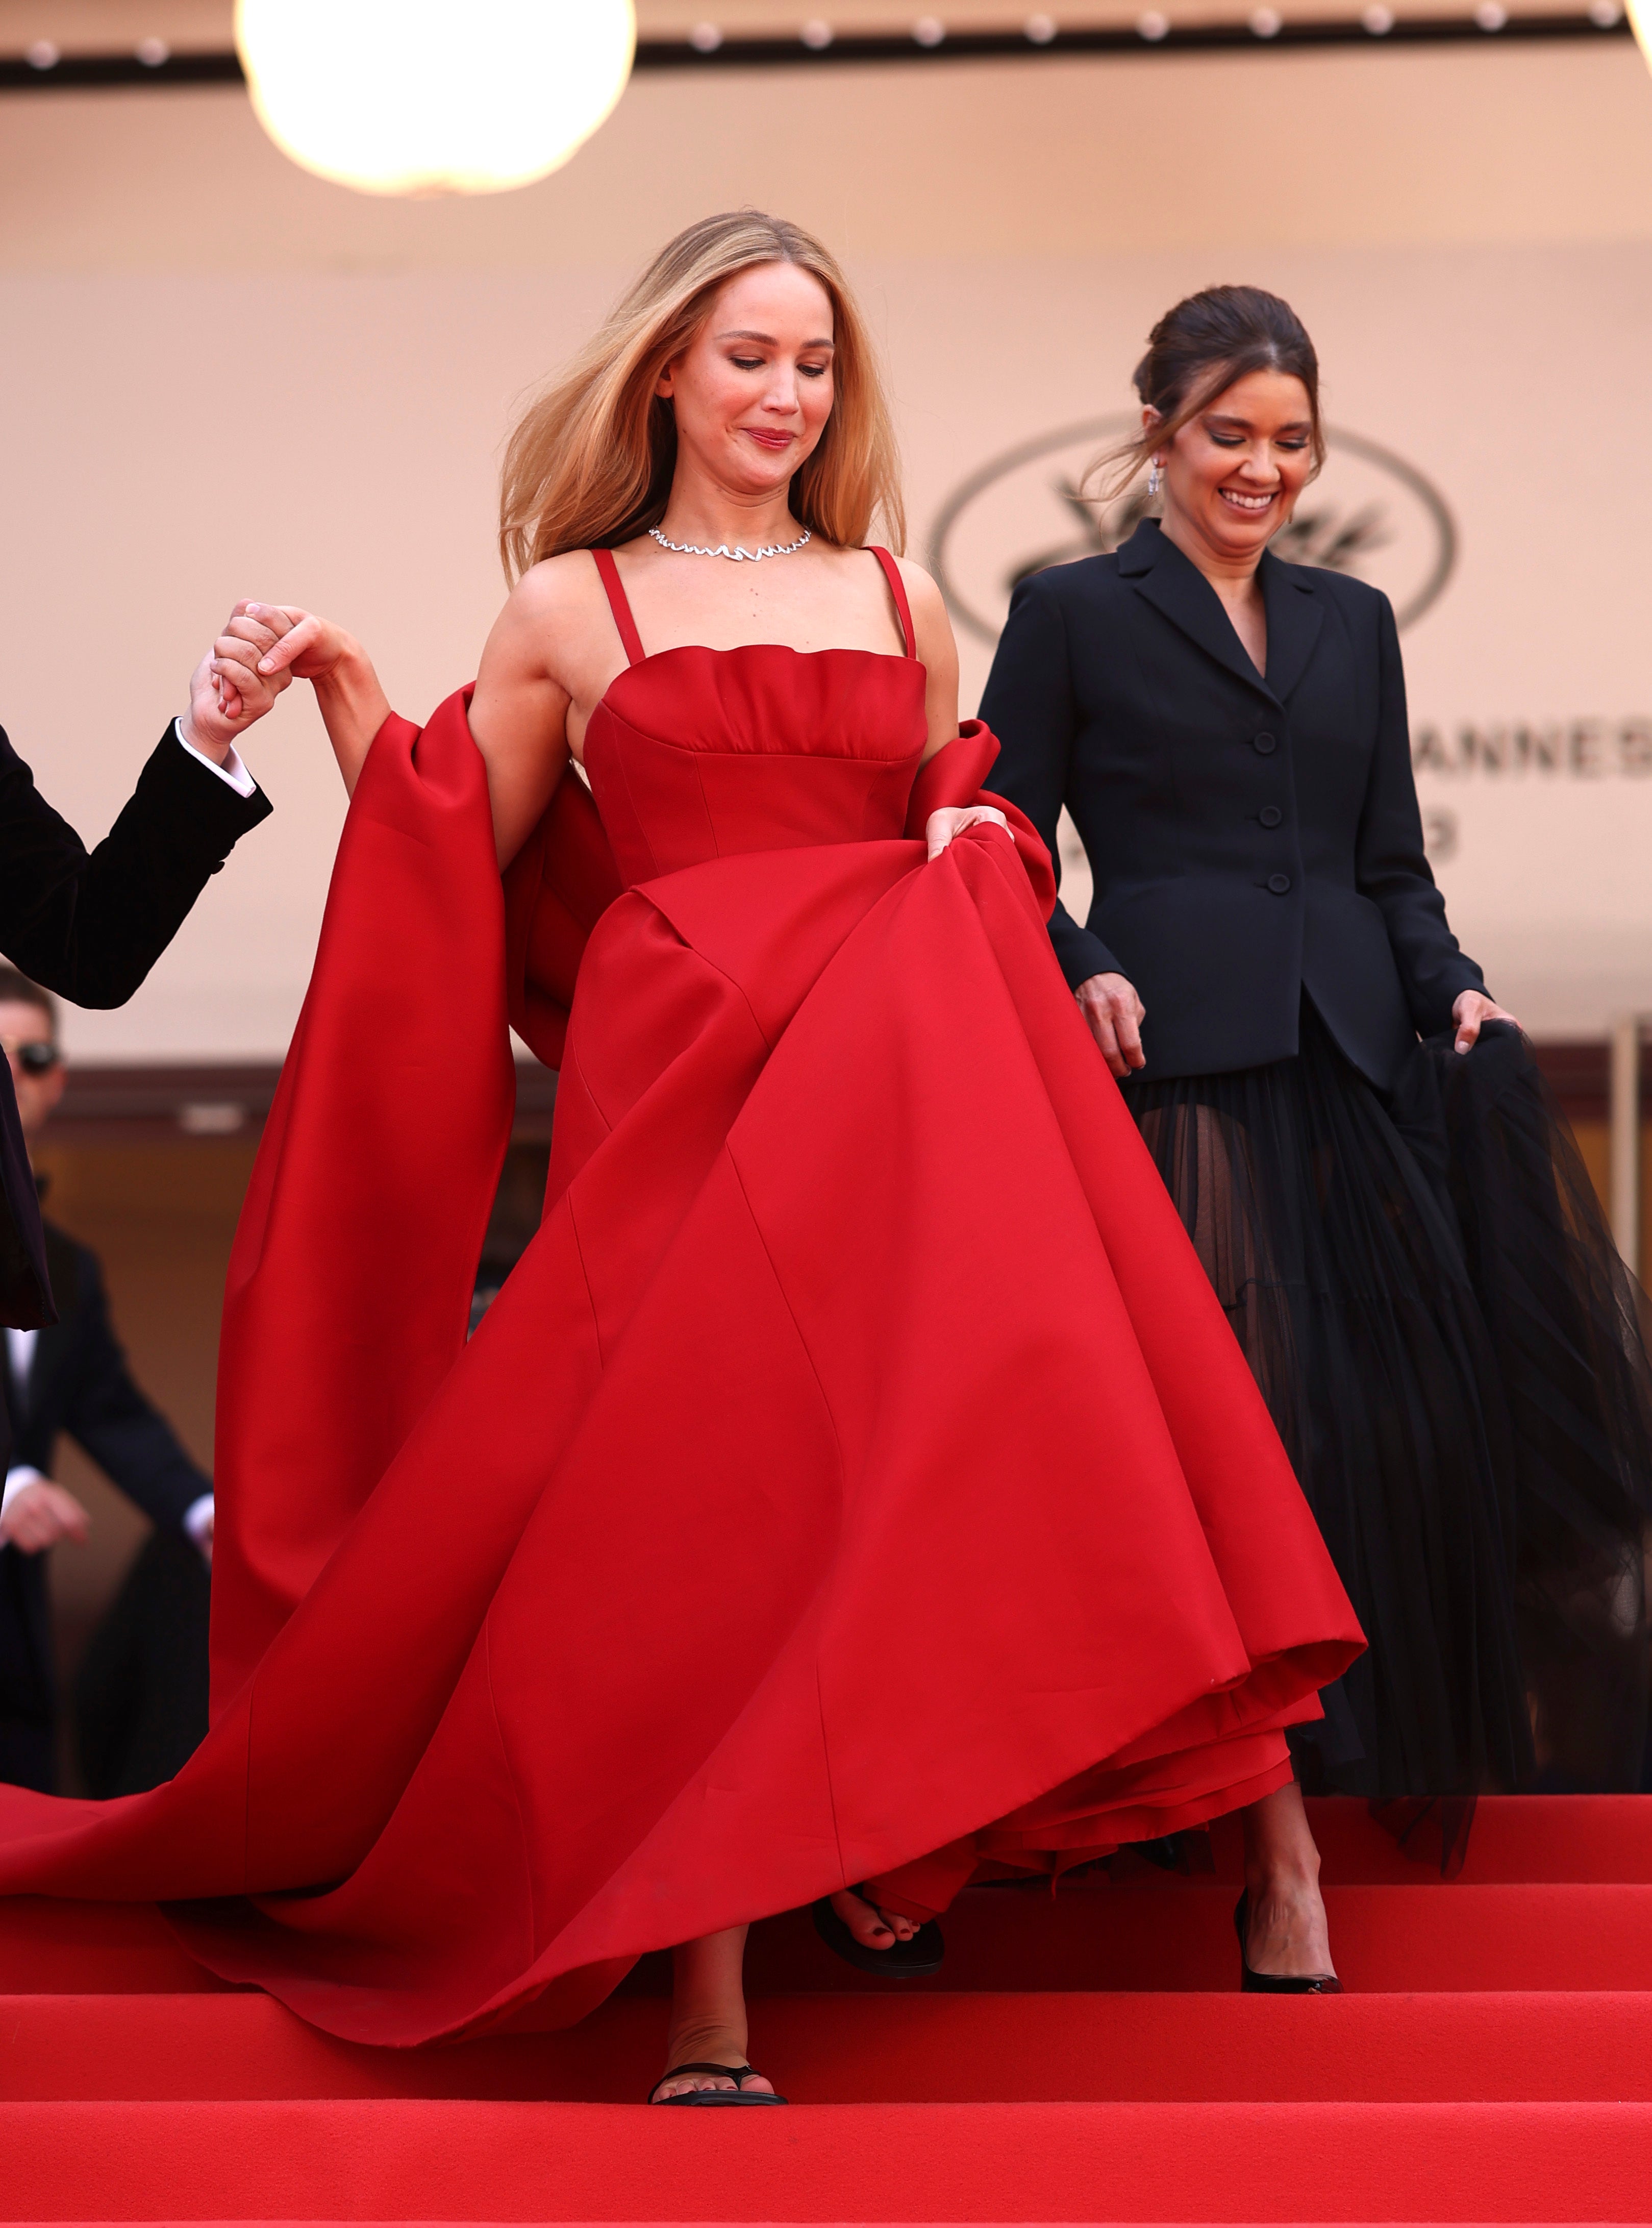 Jennifer Lawrence stuns at Cannes Film Festival in red…